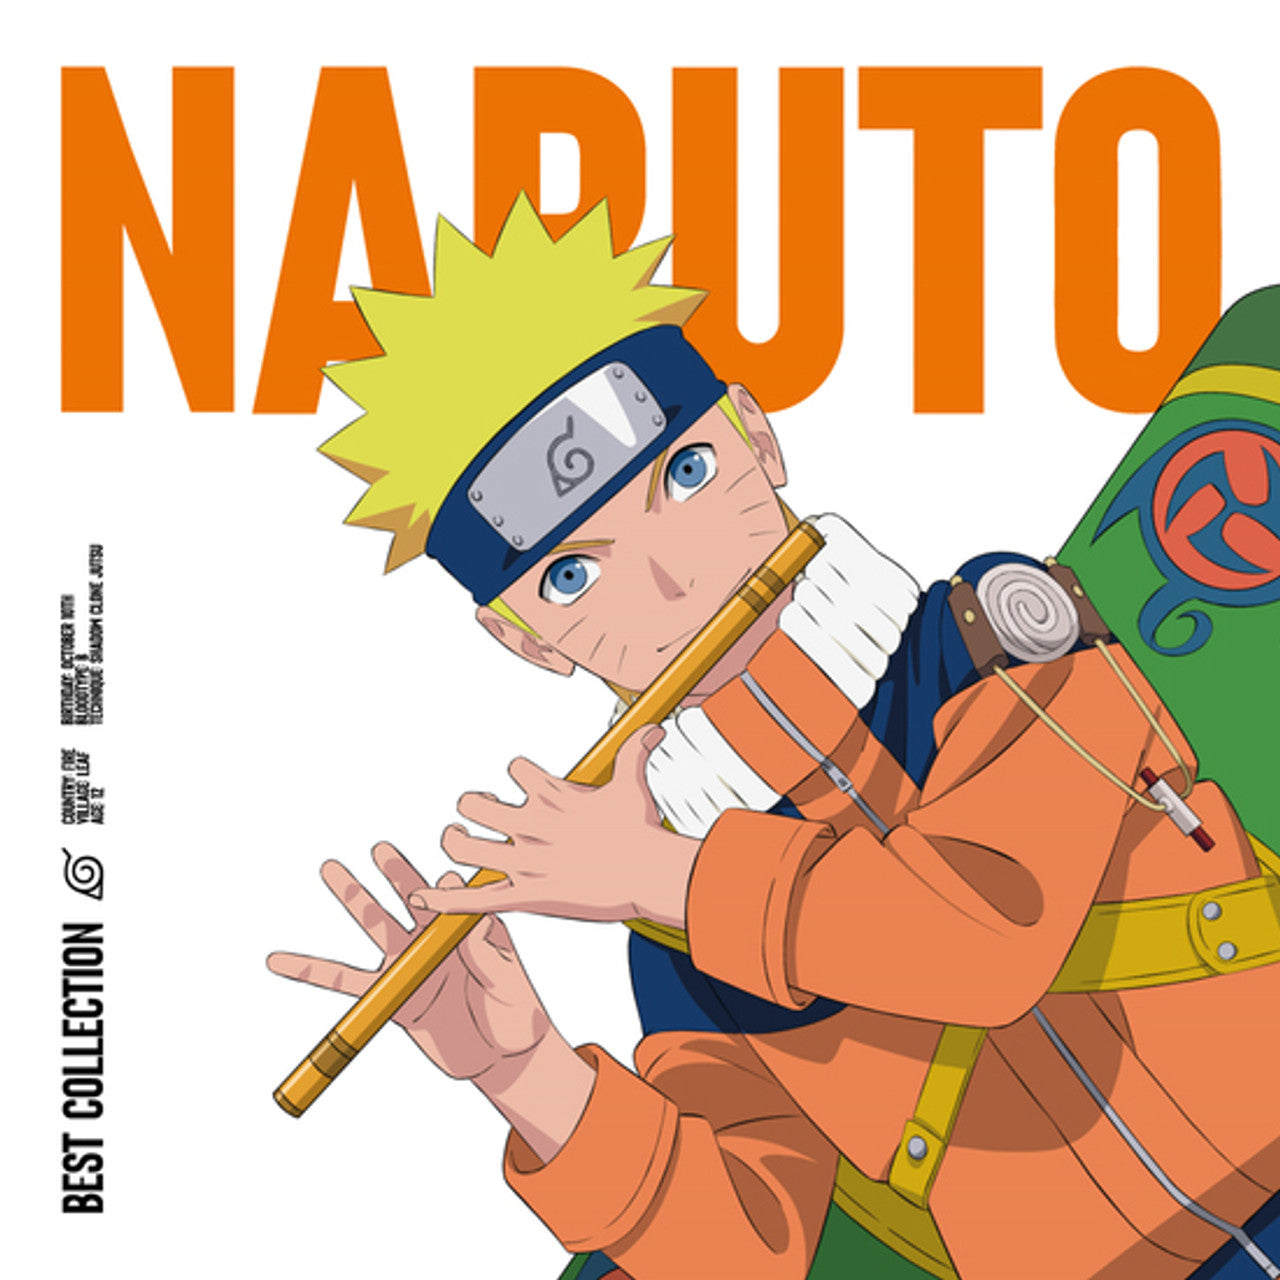 |v/a| "Naruto: Best Collection"